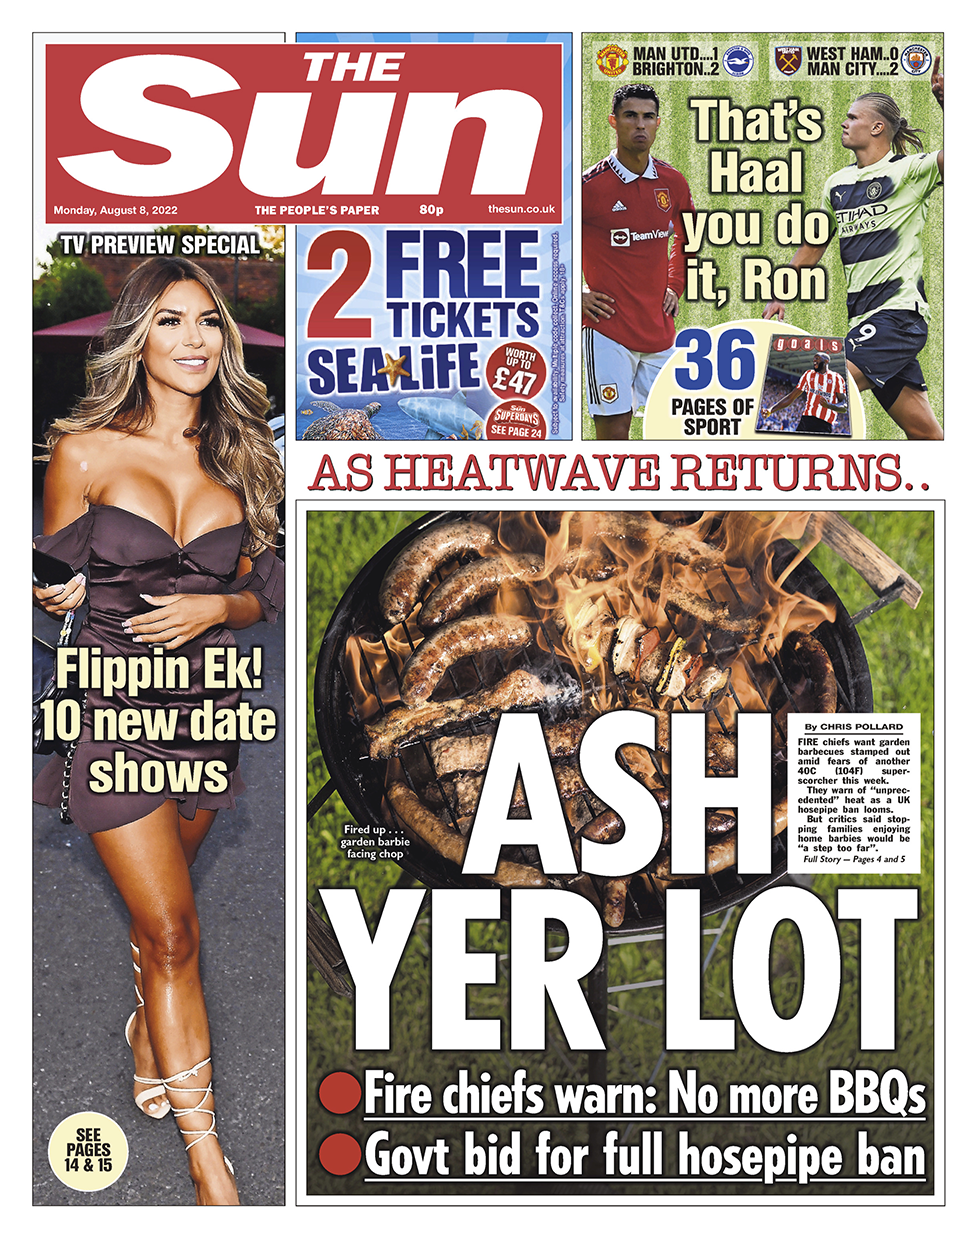 The headline in the Sun reads 'Ash yer lot'